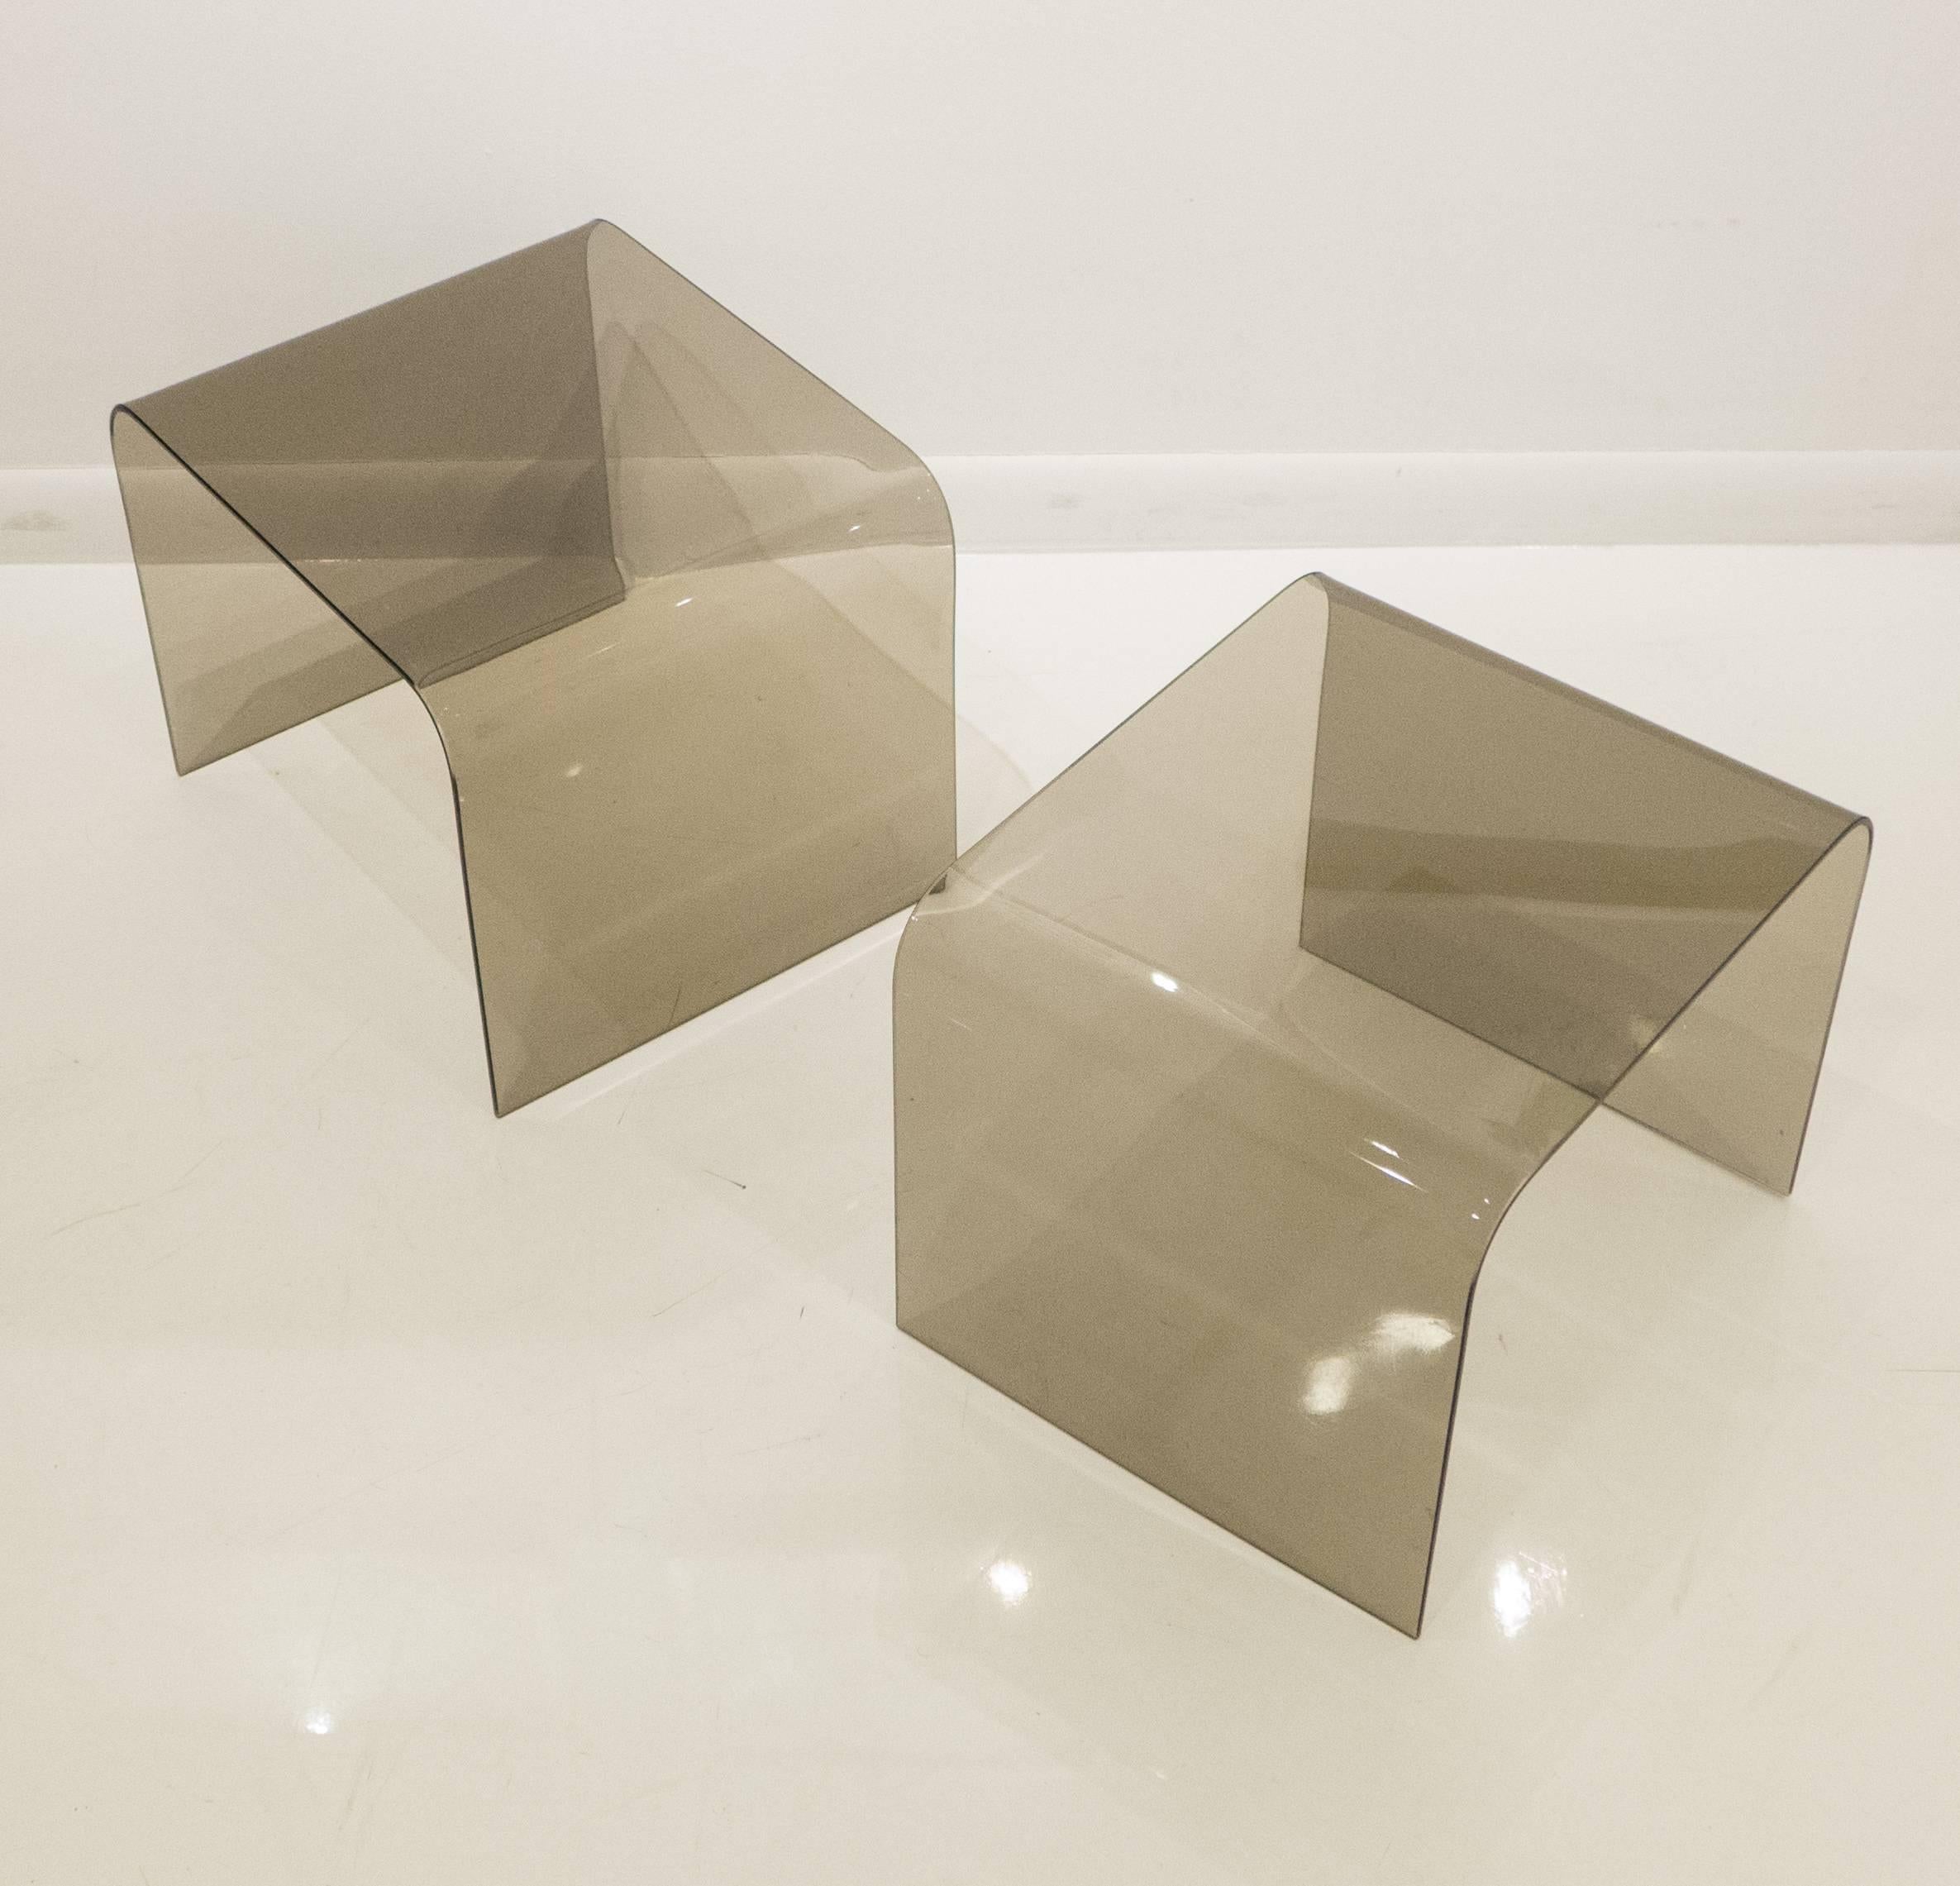 Pair of inverted u-shaped side tables of tempered smoked glass with polished edges. An elegant and well-made minimalist design. Purchased from the Pace Collection in New York City, circa 1972.